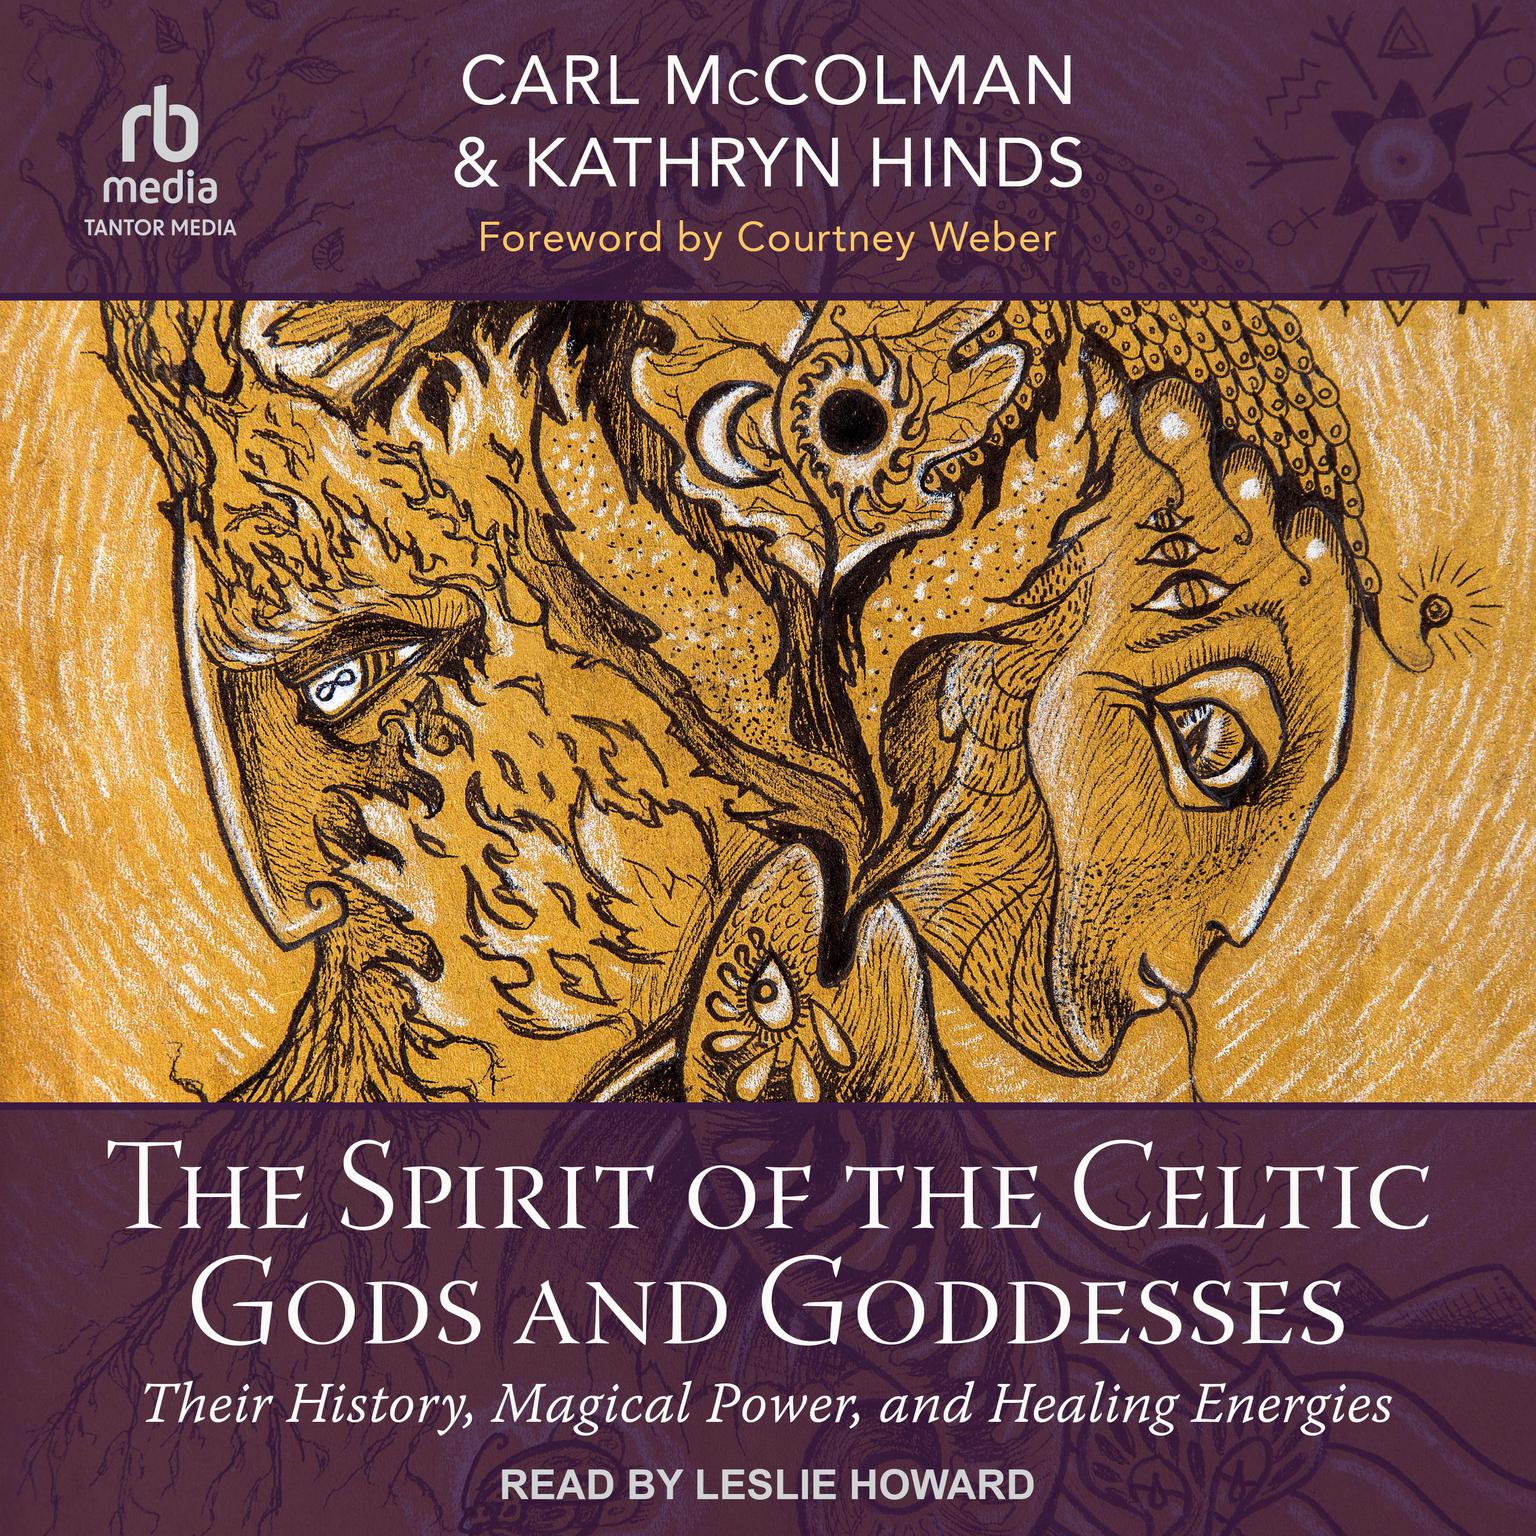 The Spirit of the Celtic Gods and Goddesses: Their History, Magical Power, and Healing Energies Audiobook, by Kathryn Hinds